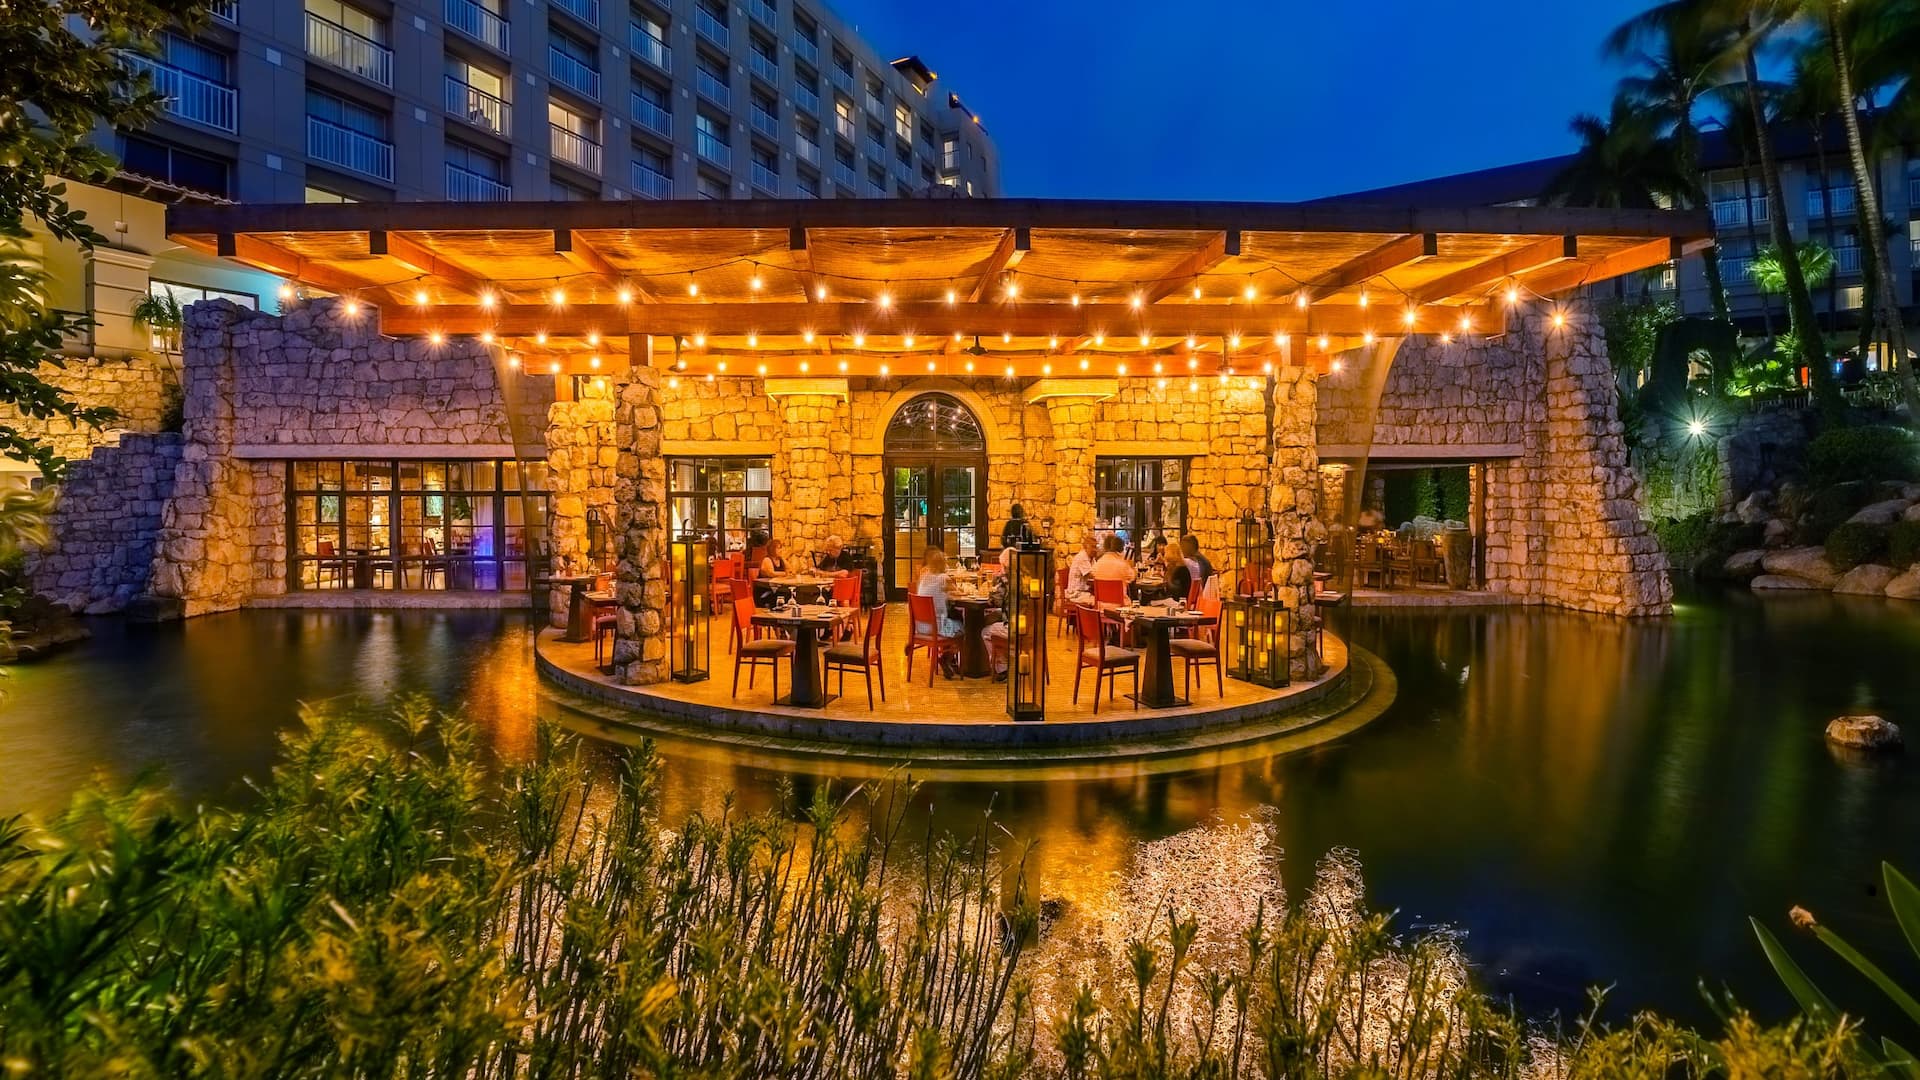 Hotel guests dining at a covered outdoor restaurant overlooking koi lagoon